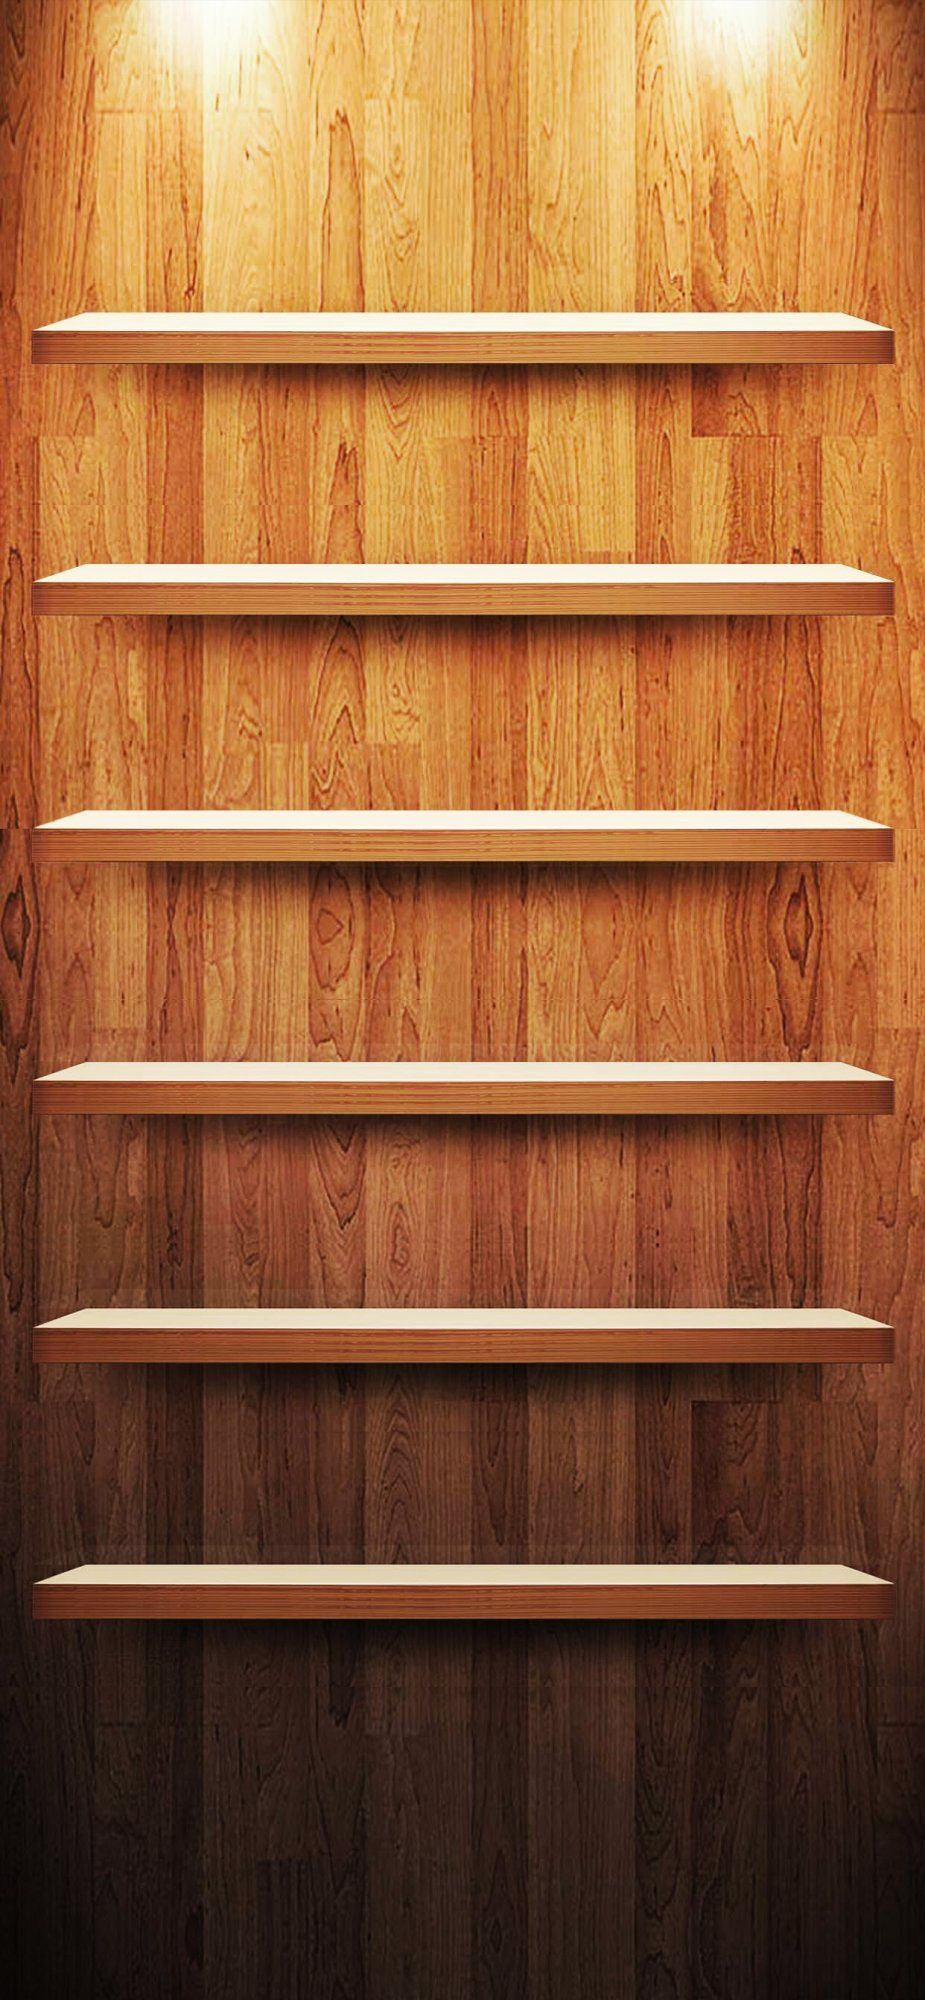 Shelves & App skins wallpaper that work on iPhone 11 Pro Max ?